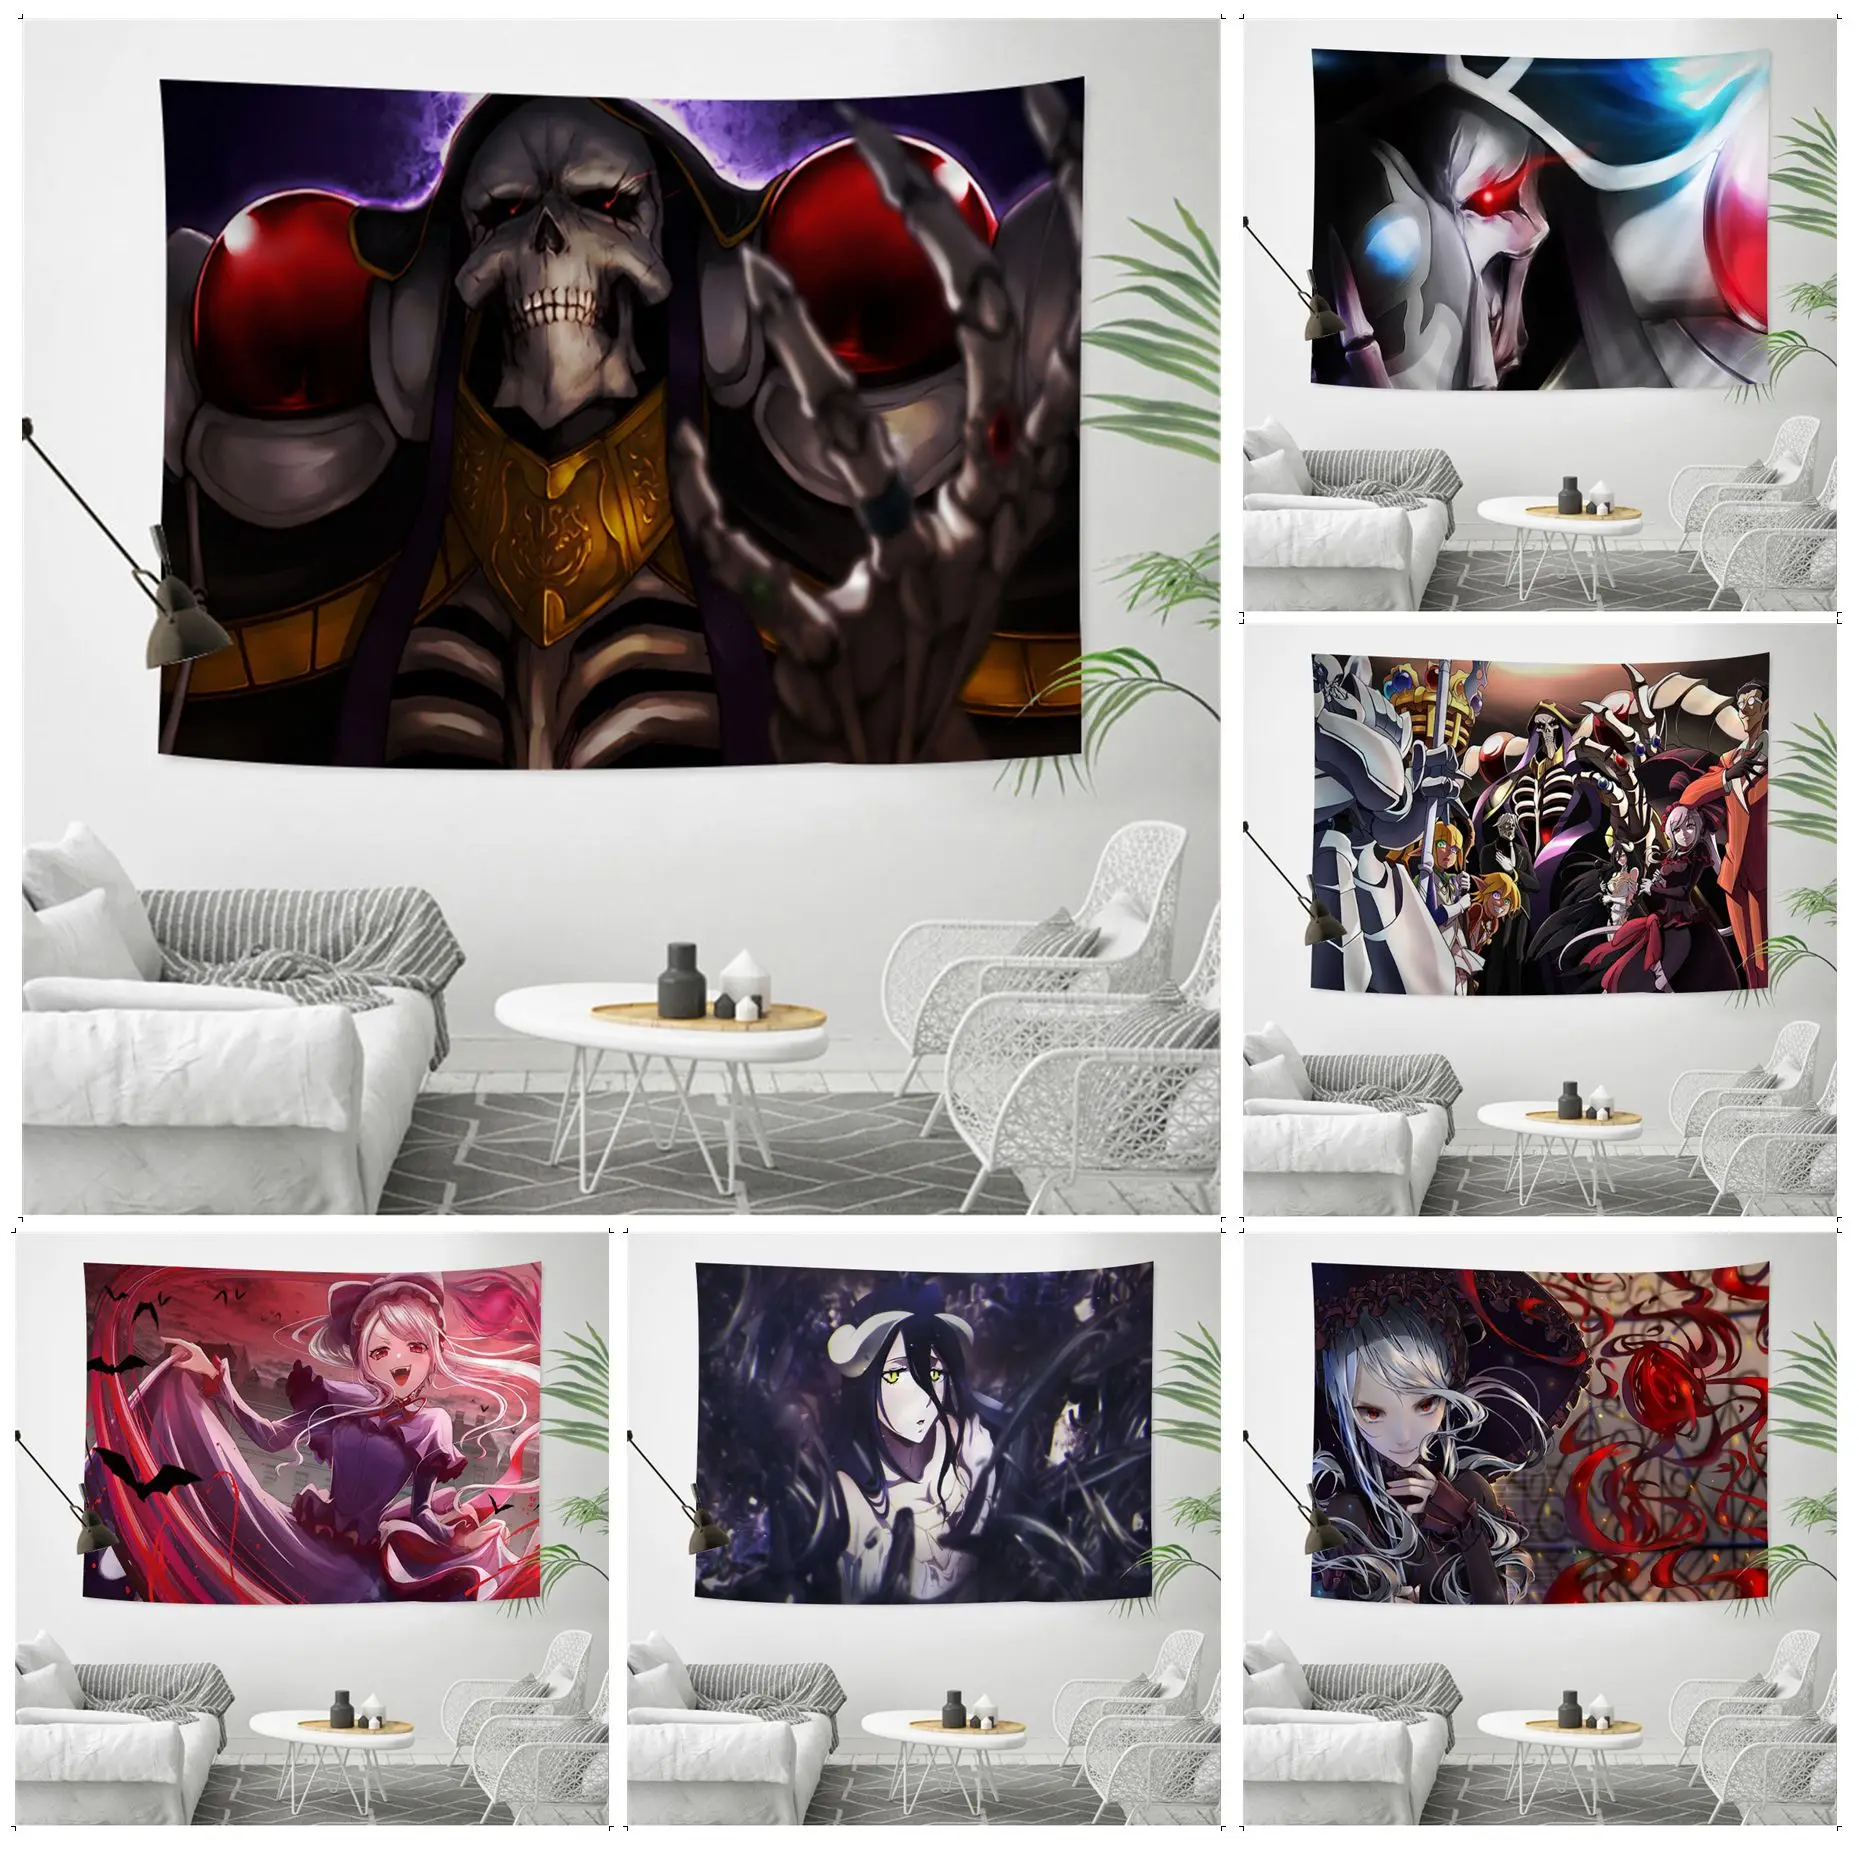 

Anime Overlord Chart Tapestry Hanging Tarot Hippie Wall Rugs Dorm Decor Blanket